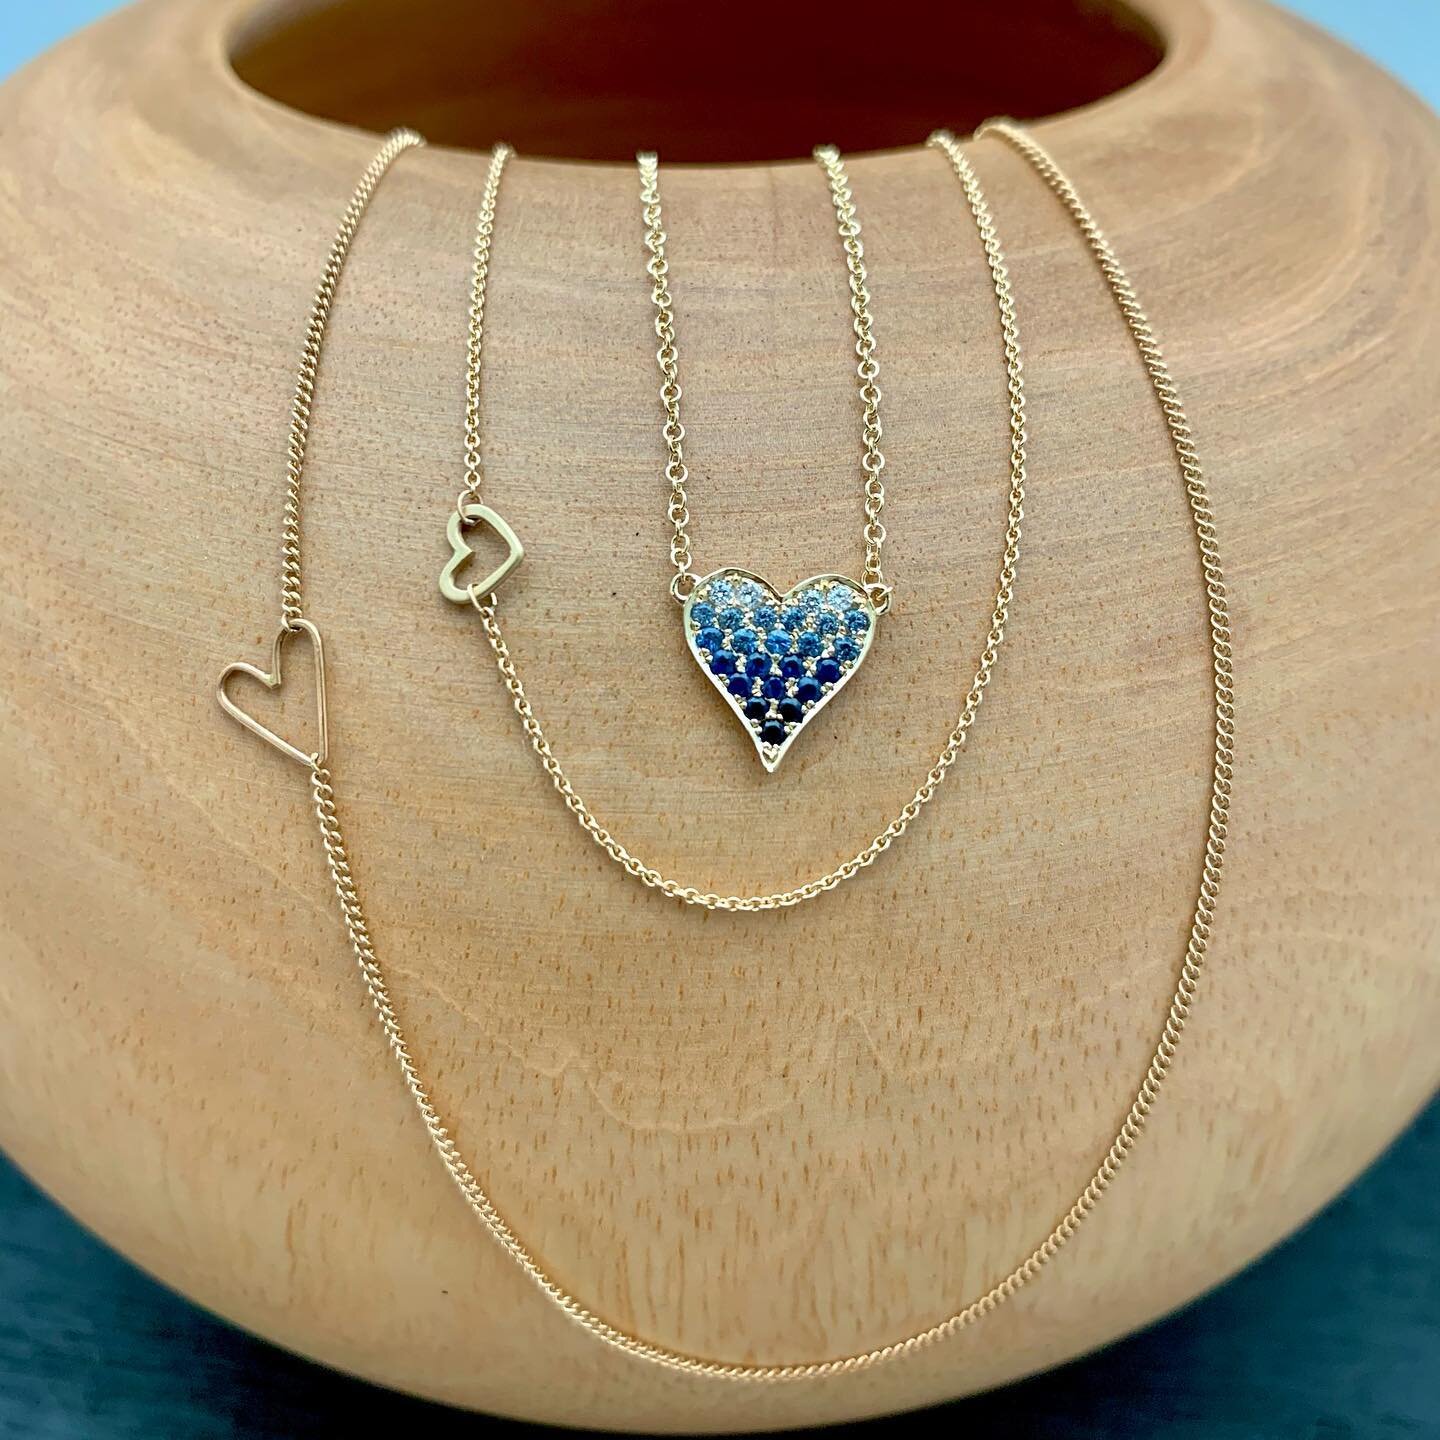 Ombr&eacute; Love💙Delicate layers to enjoy every day!  #ombrelove #layersoflove #delicatejewelry #floatinghearts #14kt #valentines2021 #giftguide #giftideasforher #studiocity #sanfernandovalley #venturablvd #